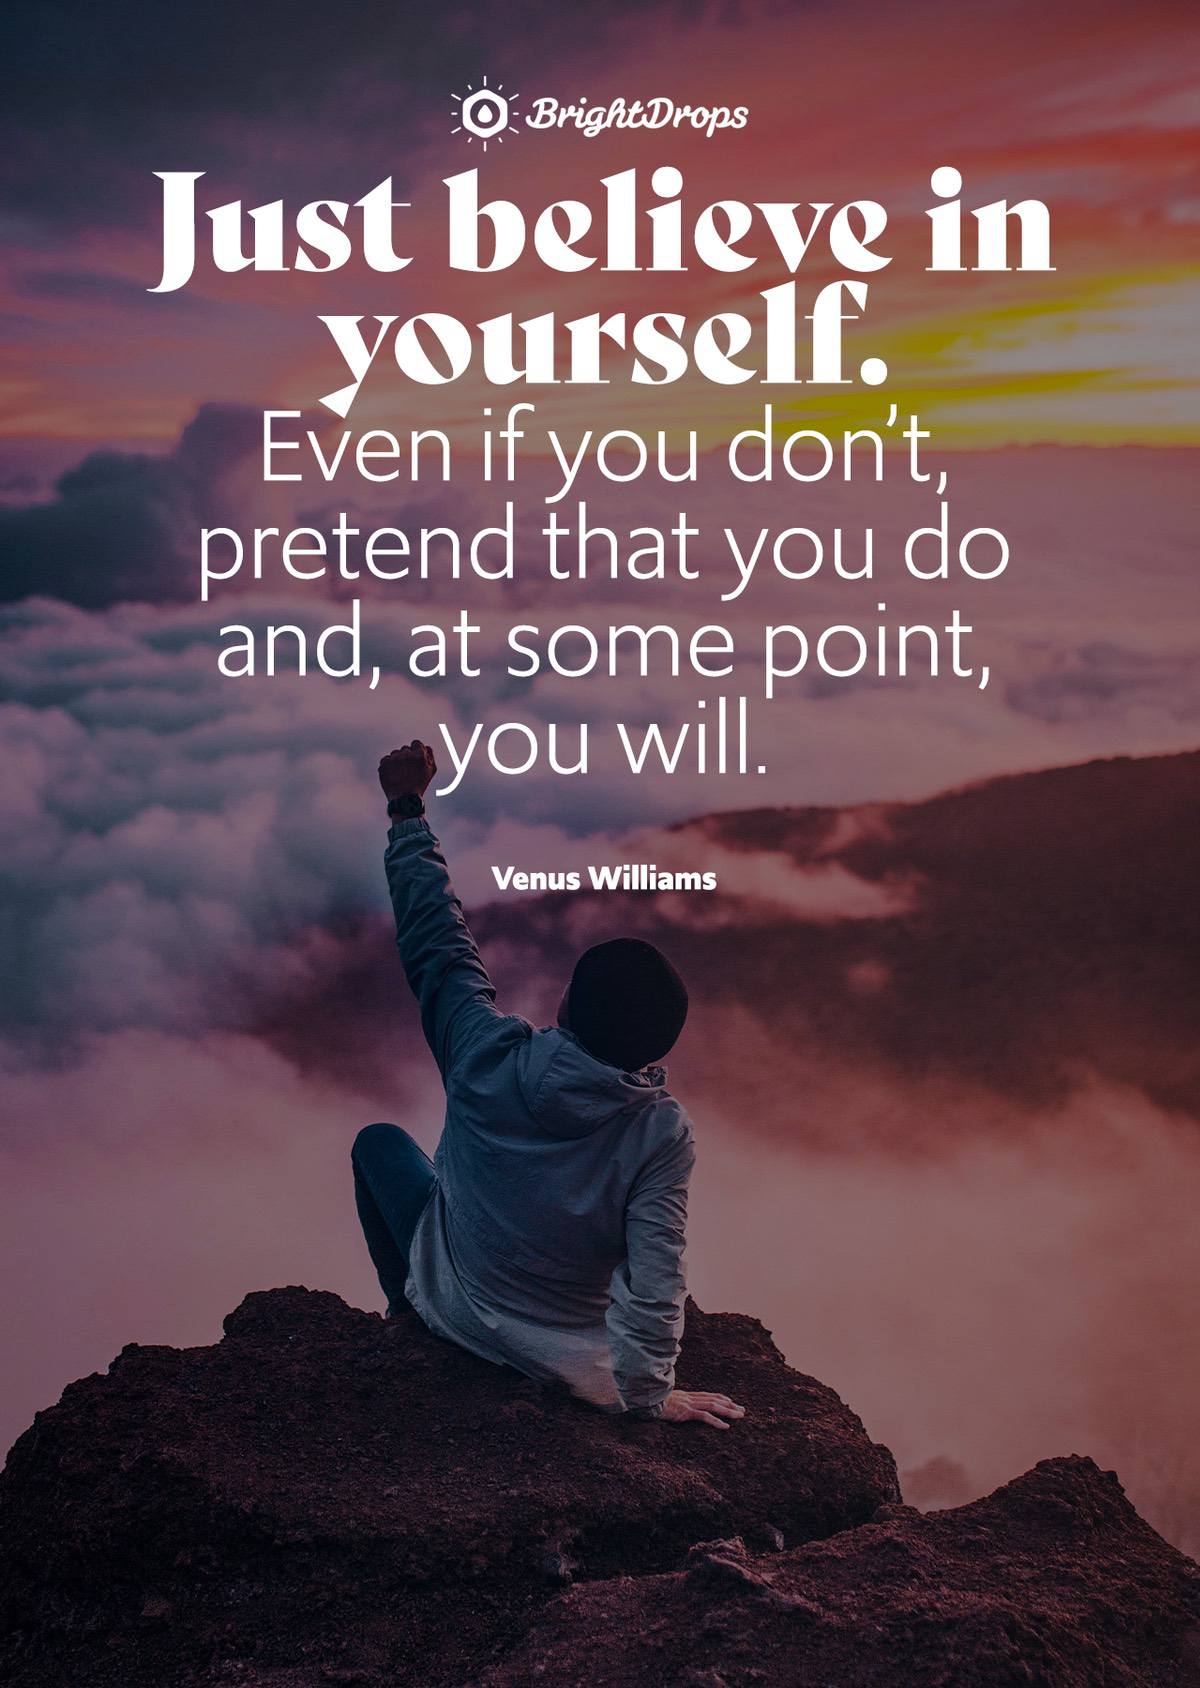 Just believe in yourself. Even if you don’t, pretend that you do and, at some point, you will. - Venus Williams